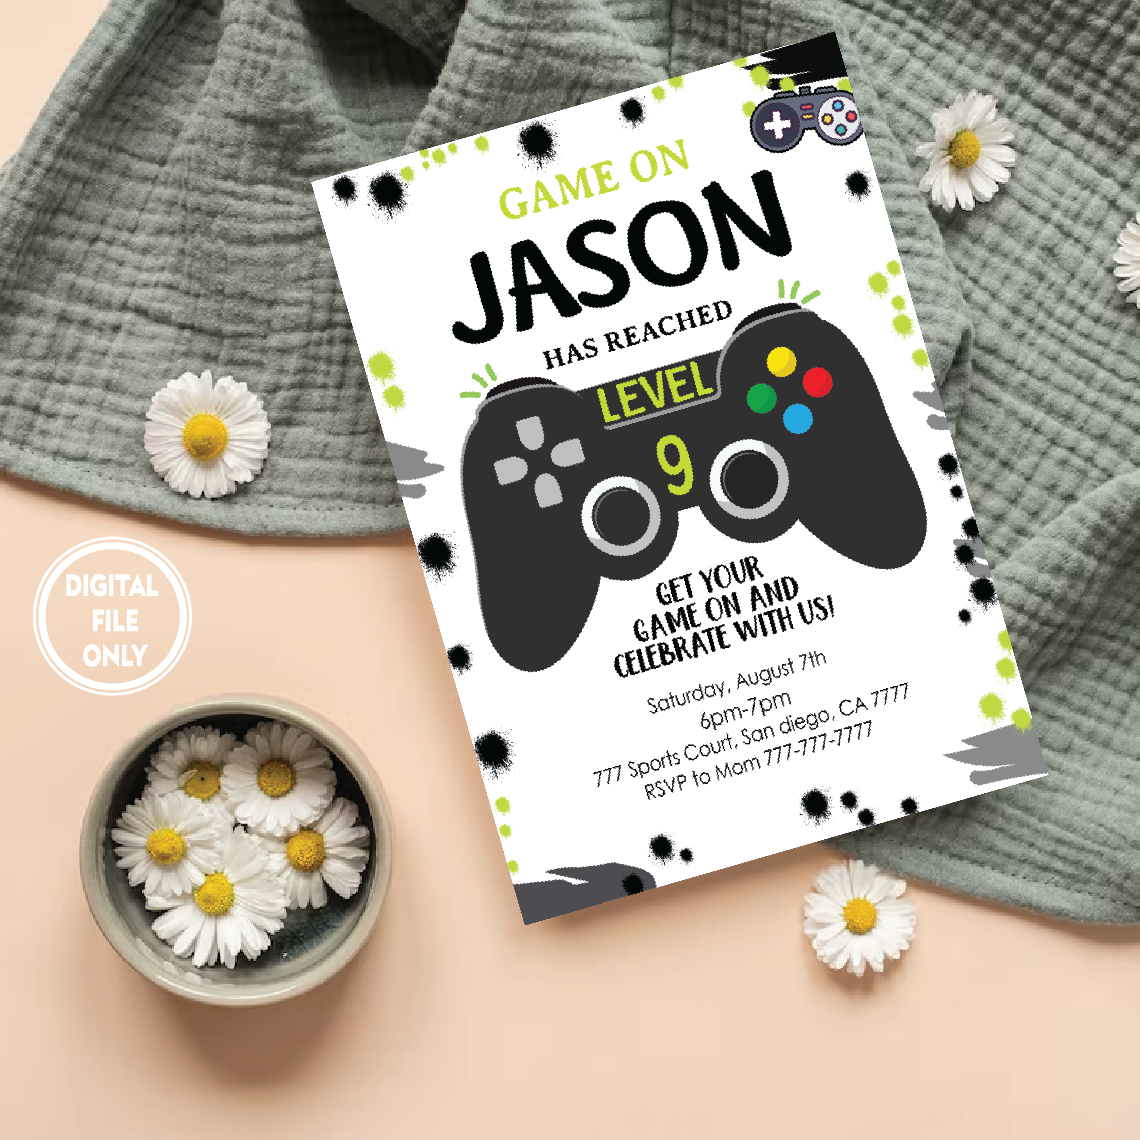 Personalized File Video Games Invitation PNG File Only, Video Games Invites Birthday Png, Instant Download Video Games Invitations